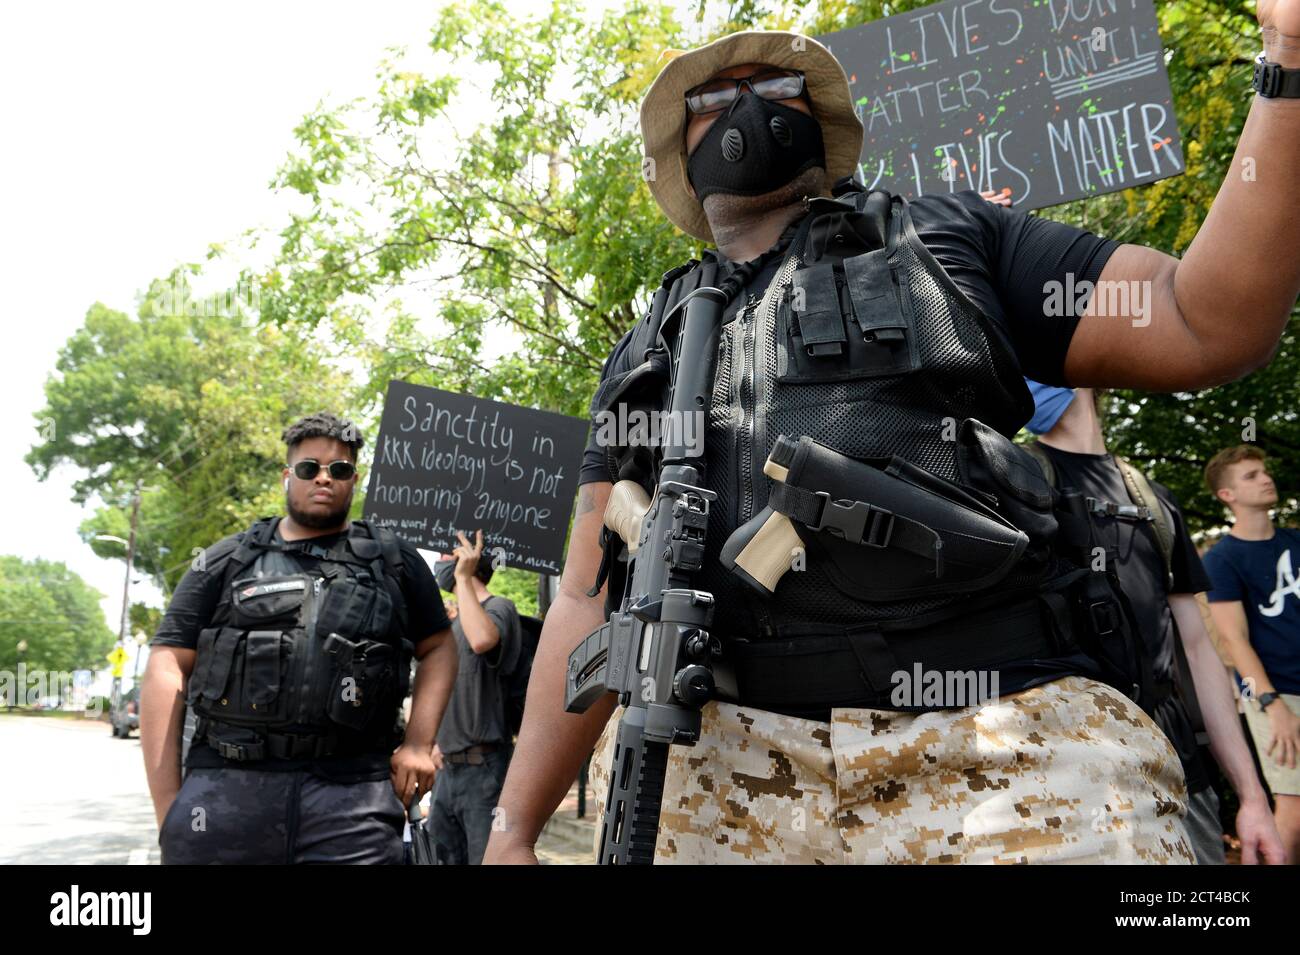 LOCK & LOADED: June 6, 2020, Kennesaw, Georgia, USA: Armed members of 'My Brother's Keeper' organization, carrying loaded AK-47s and handguns, brandishing signs saying: SANCTITY IN KKK IDEOLOGY IS NOT HONORING ANYONE and LIVES WON'T MATTER UNTIL ALL LIVES MATTER. One of the heavily armed men stated: 'We want to make sure everyone stays safe'. Group of angry demonstrators gathered outside Wildman's Civil War Surplus on Main Street. Mr. Myers owns the store and the building that has housed his controversial shop for more than 40 years. The protesters urged city officials for closure of the store Stock Photo